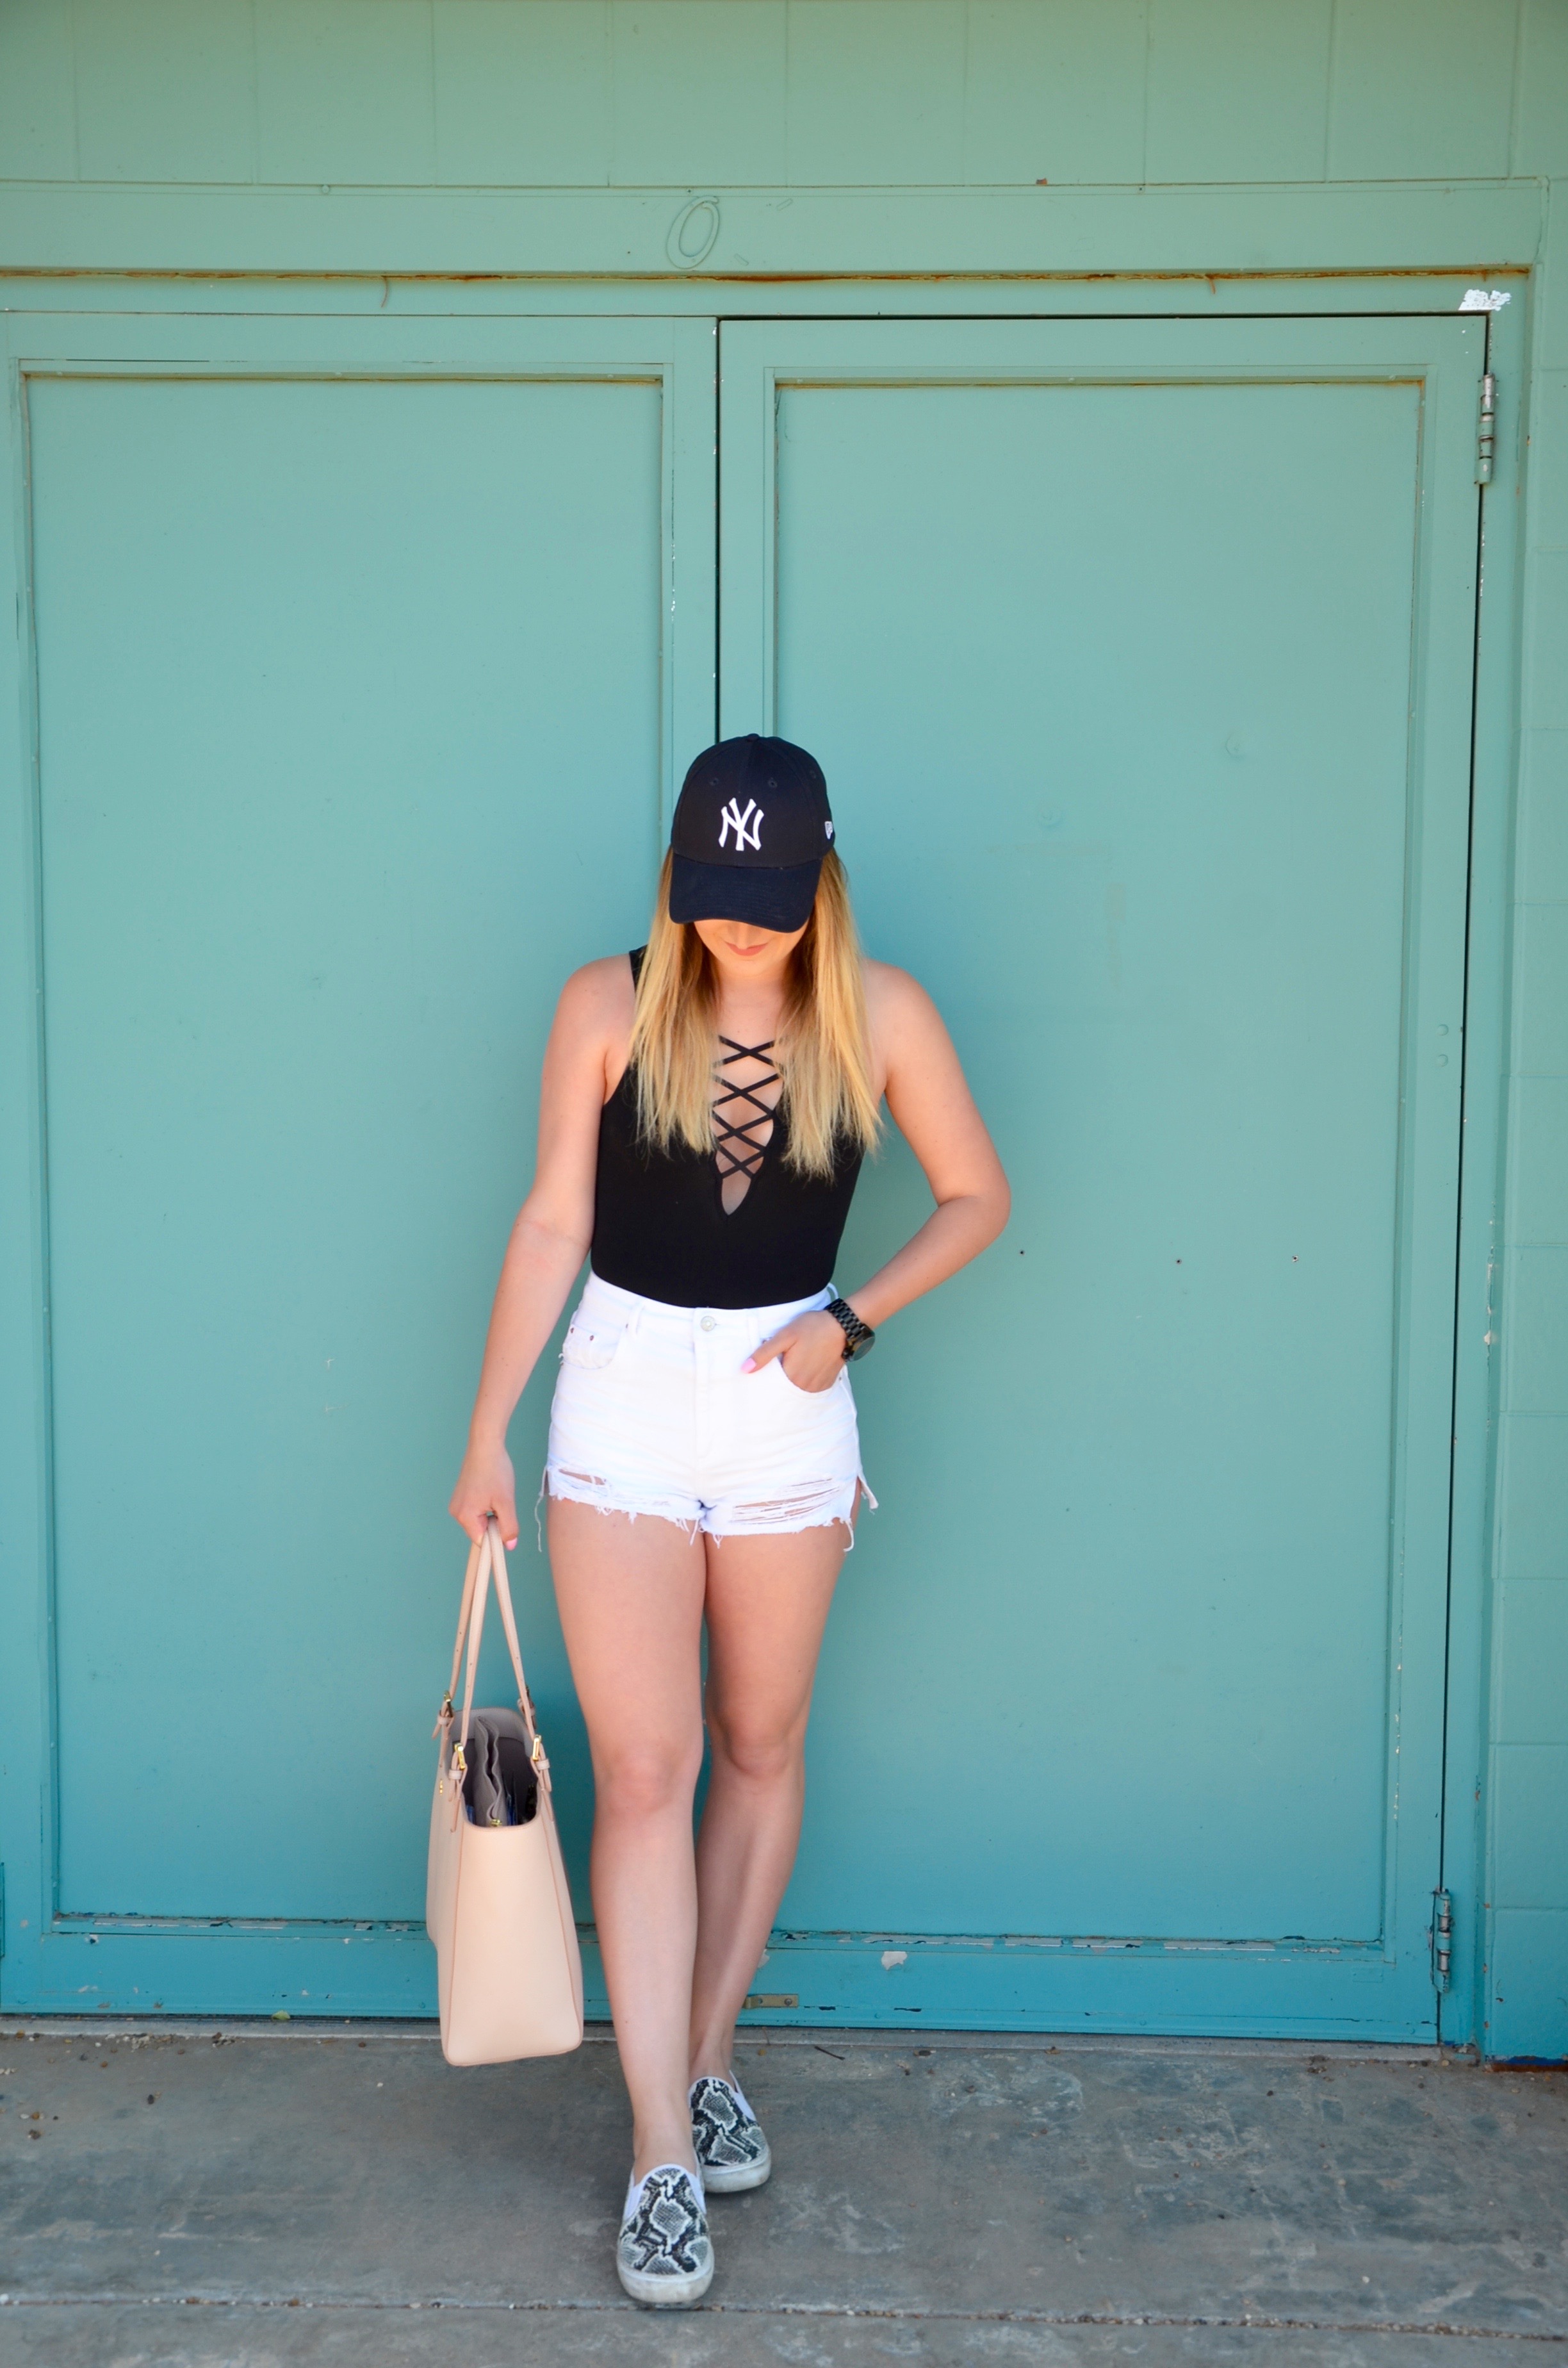 snake skin vans - Travel Outfit Of The Day by popular Texas style blogger Audrey Madison Stowe